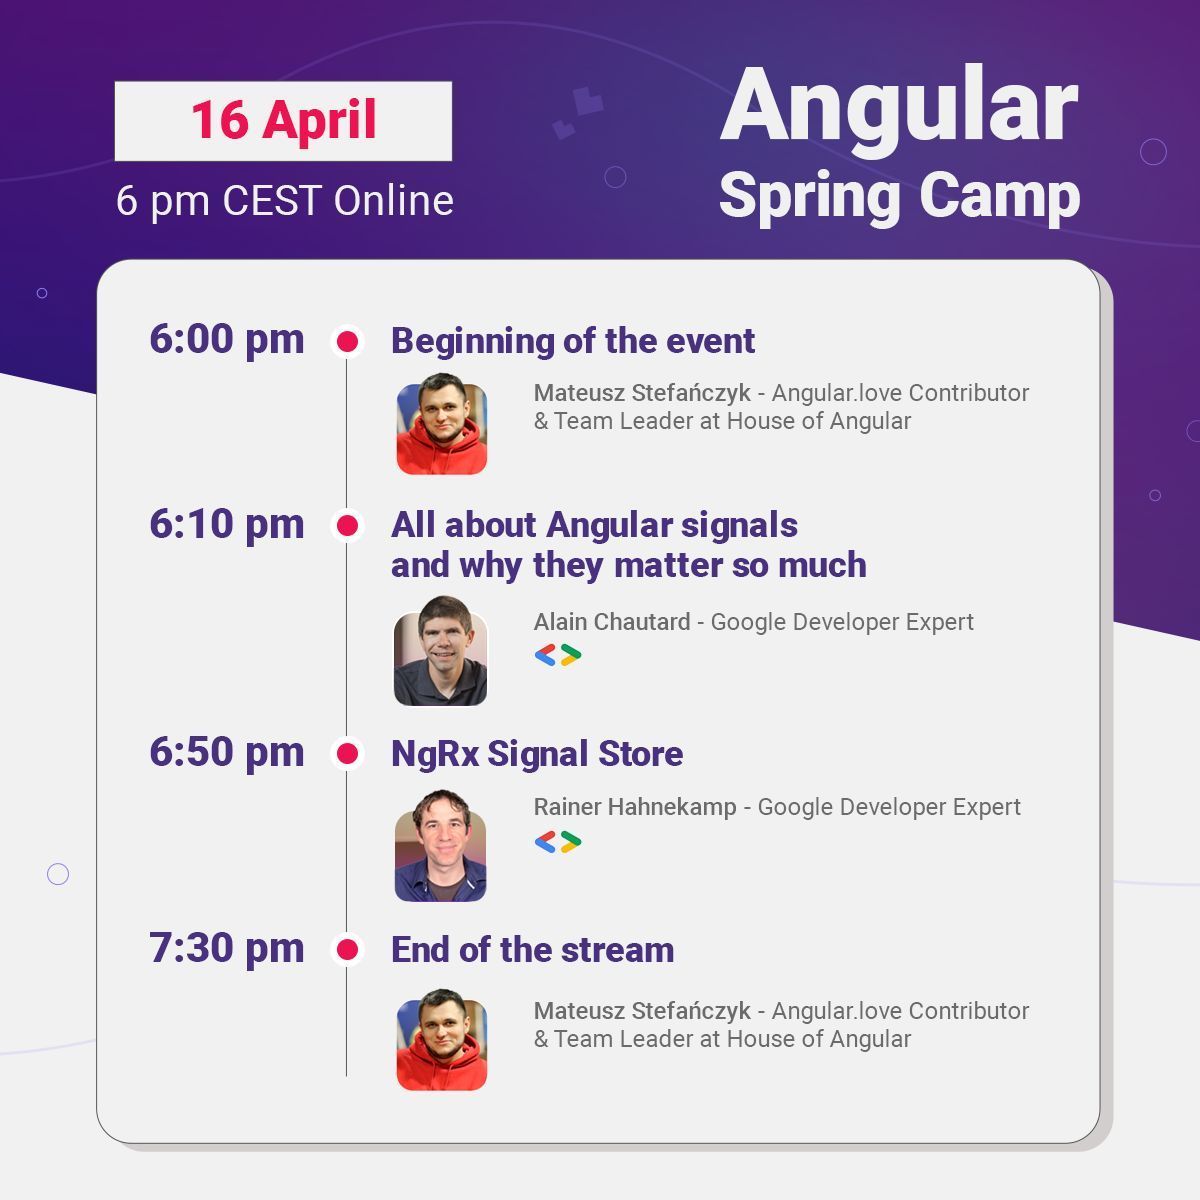 🌟 Don't miss our first meetup from the #Angular Spring Camp series! 📅 Tuesday, April 16, at 6 pm CEST 📍 Online on our YouTube channel 🔗 Register here: buff.ly/4azAtWG What will you learn at the meeting? Check out the event agenda ⬇️